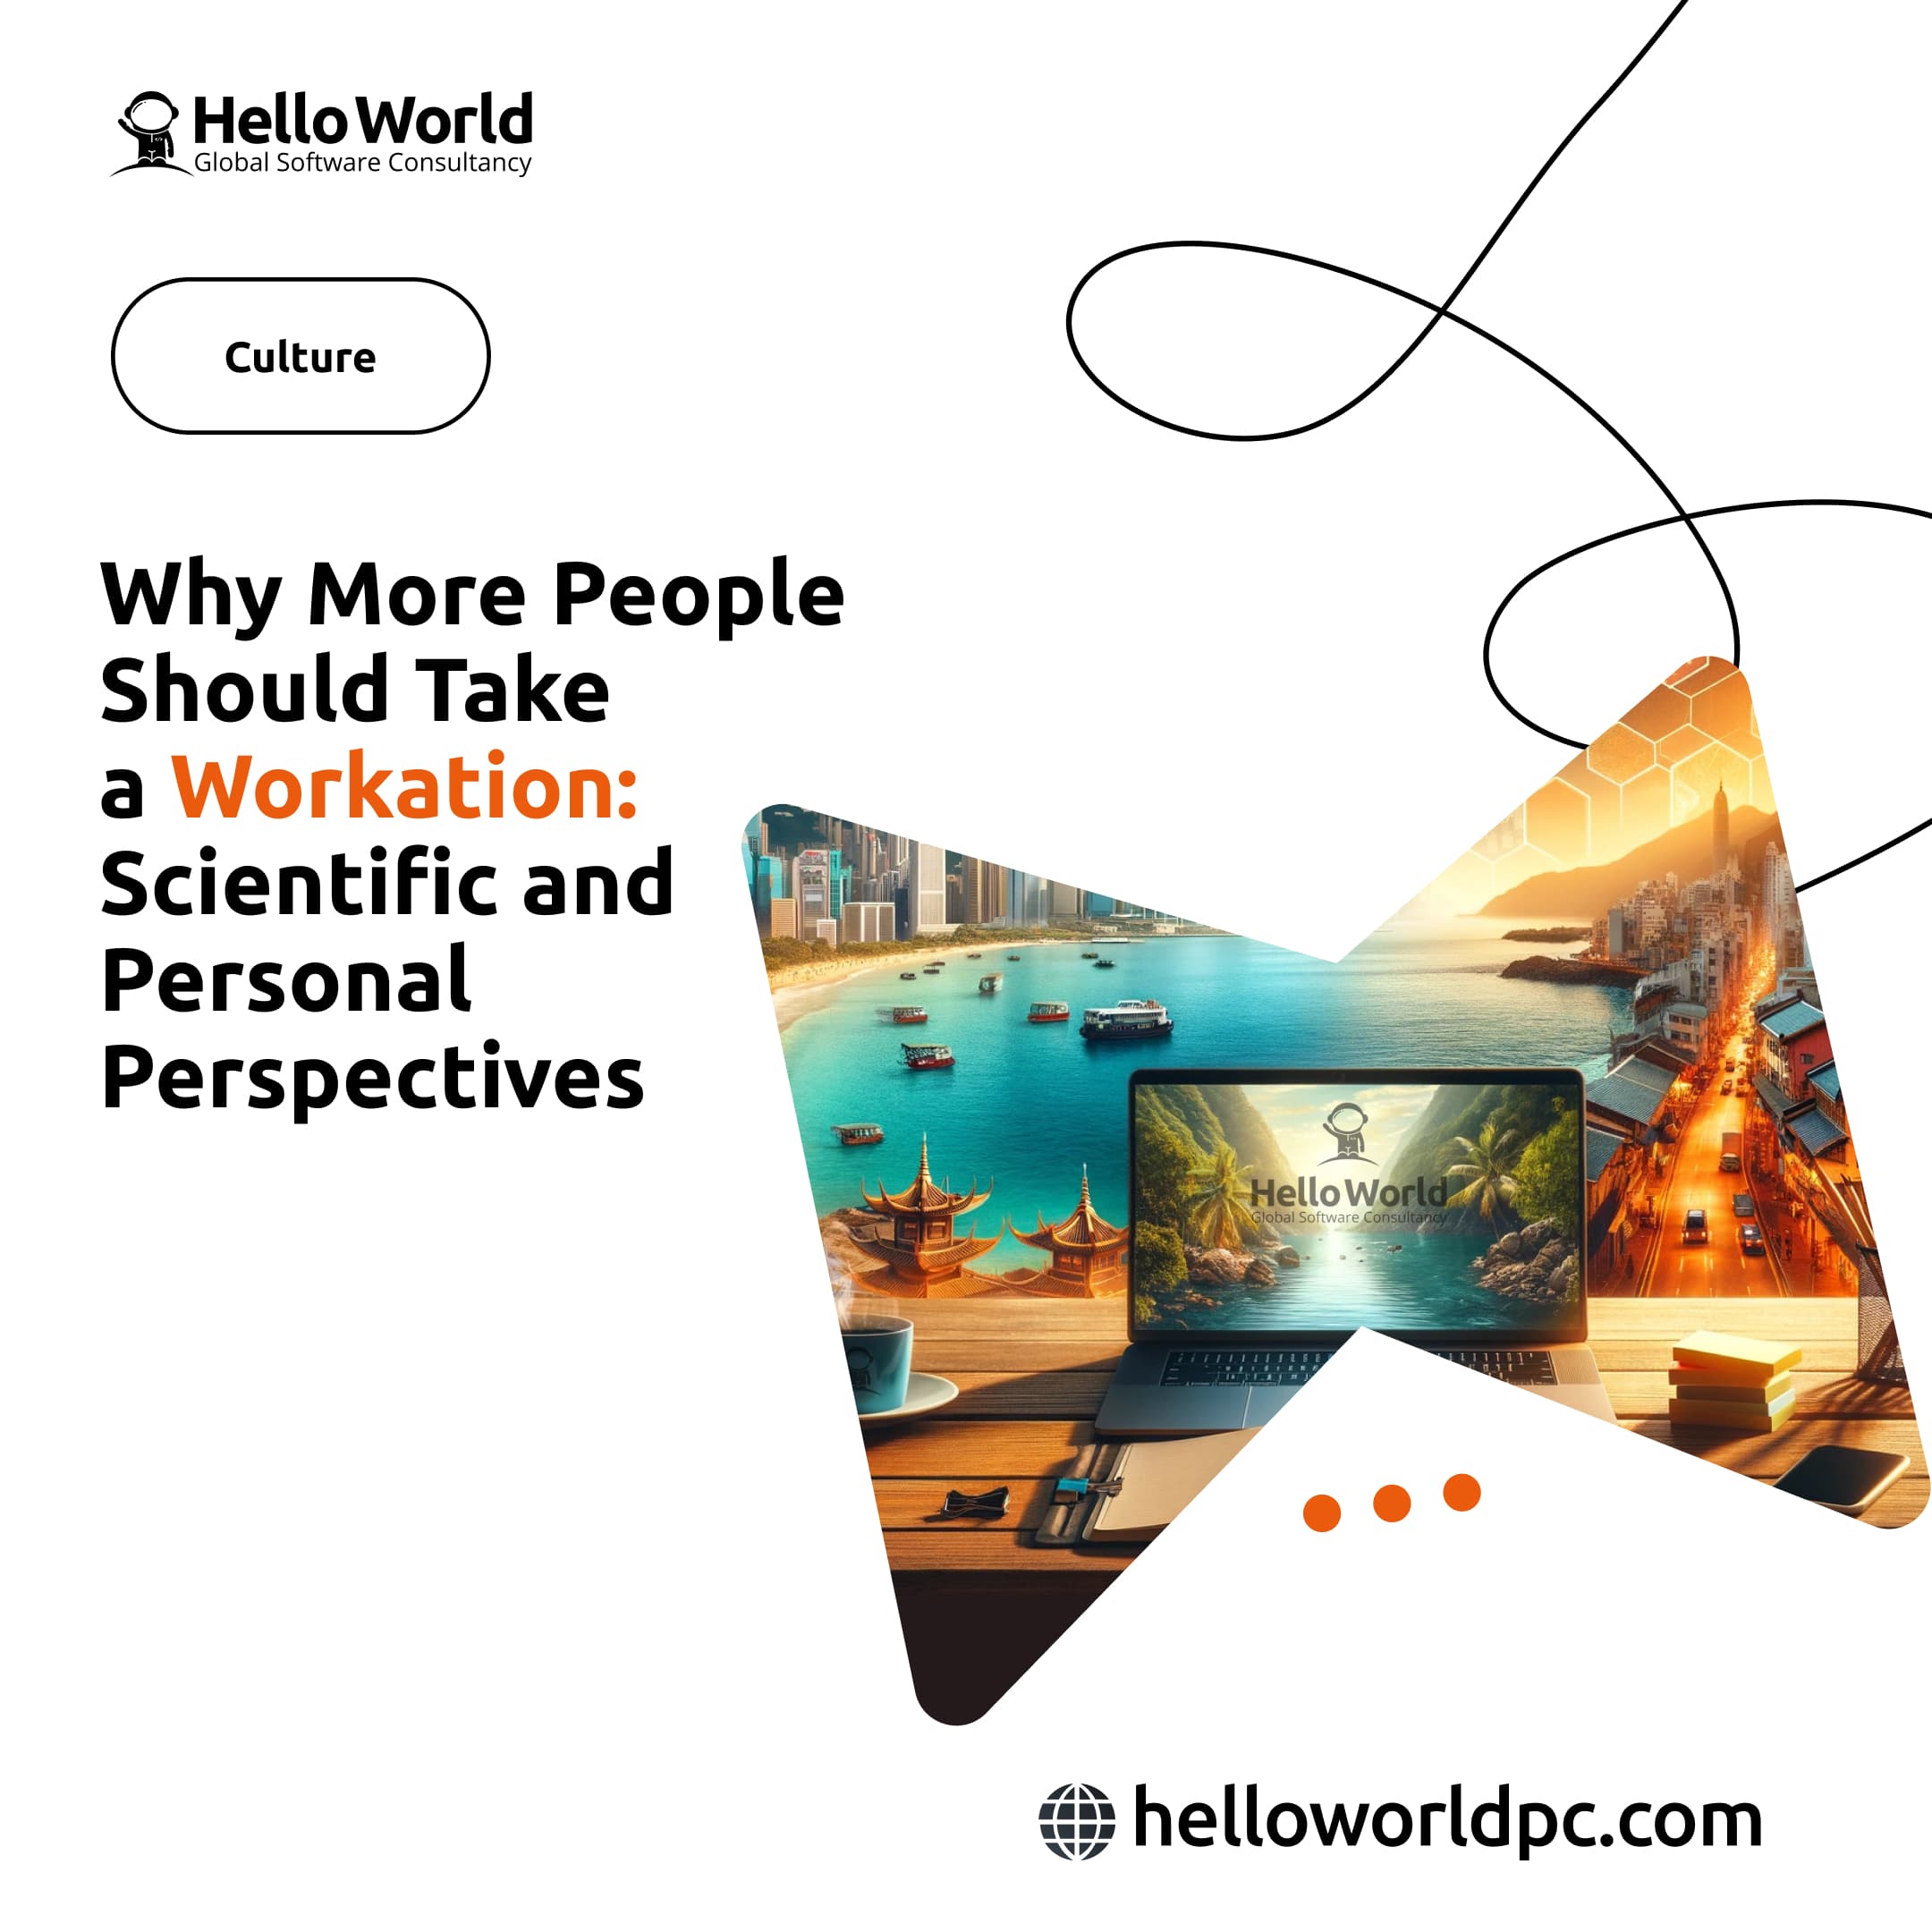 Why More People Should Take a Workation: Scientific and Personal Perspectives